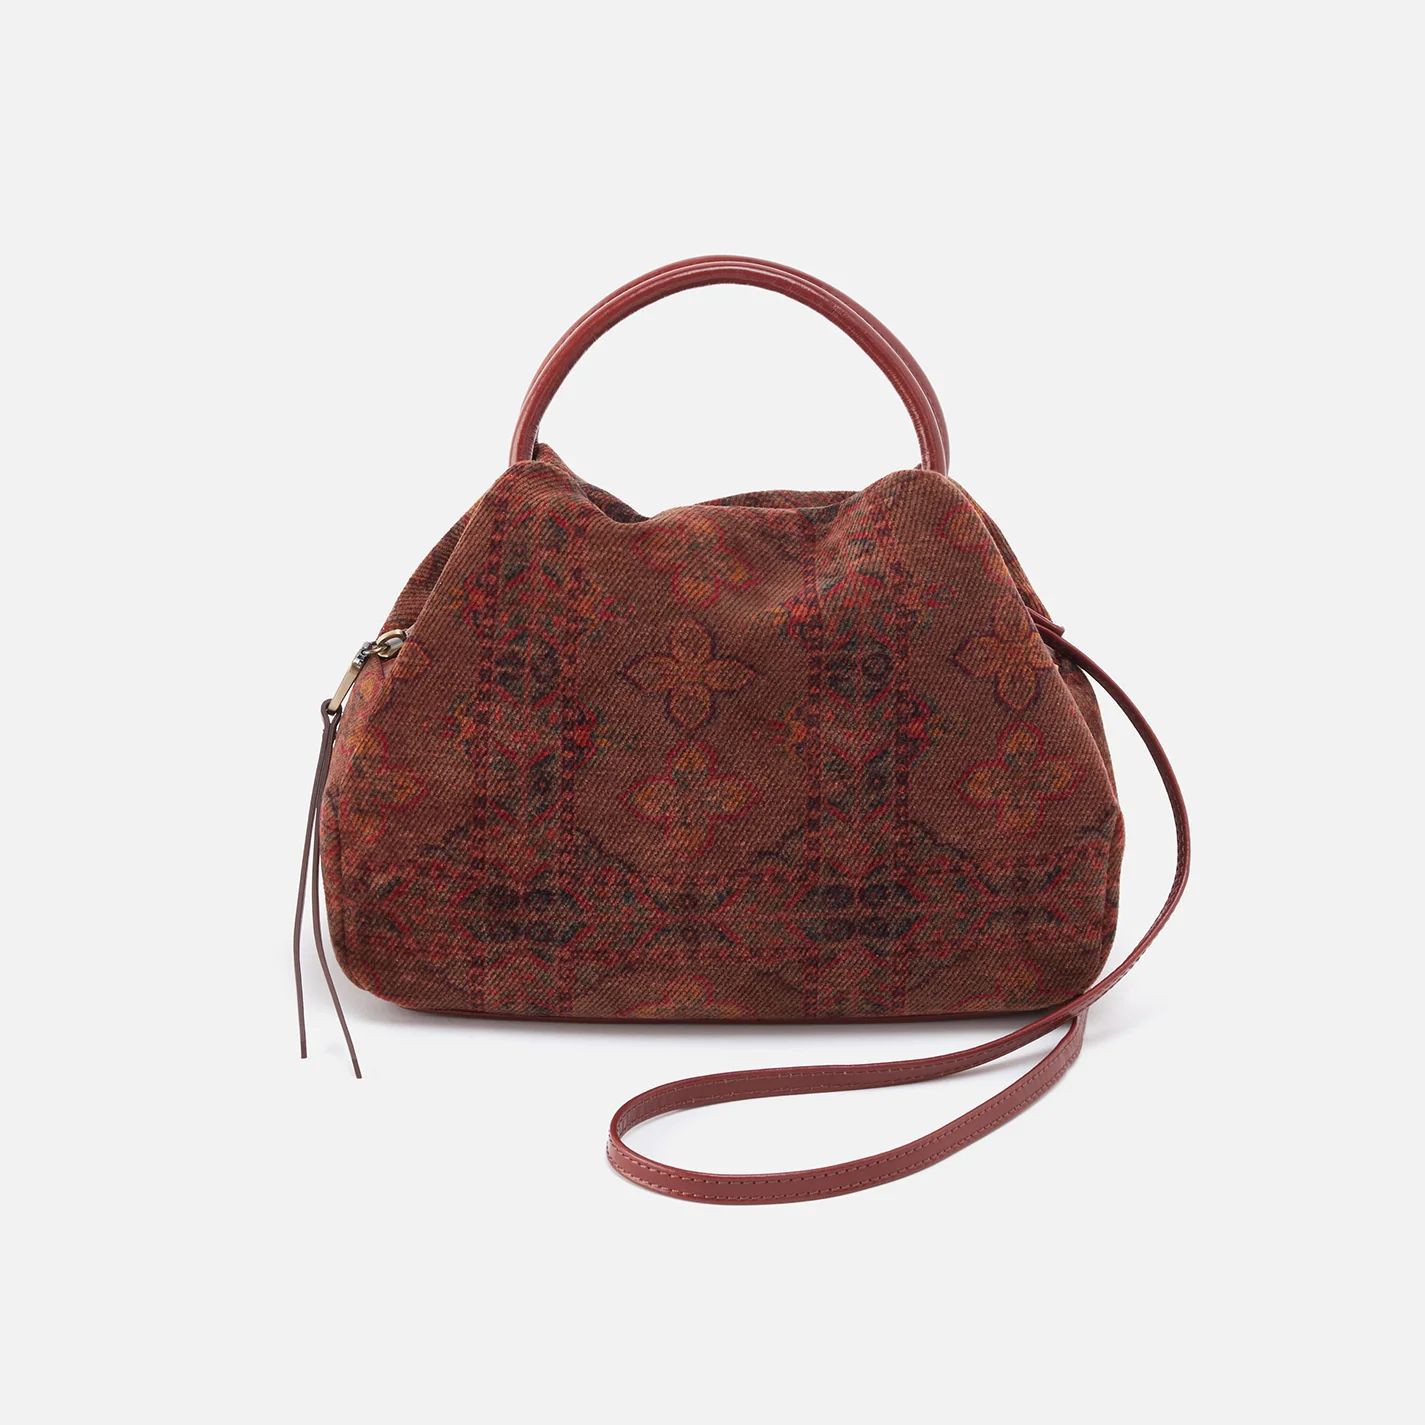 Darling Small Satchel in Tapestry Fabric With Leather Trim - Feather Tapestry | HOBO Bags